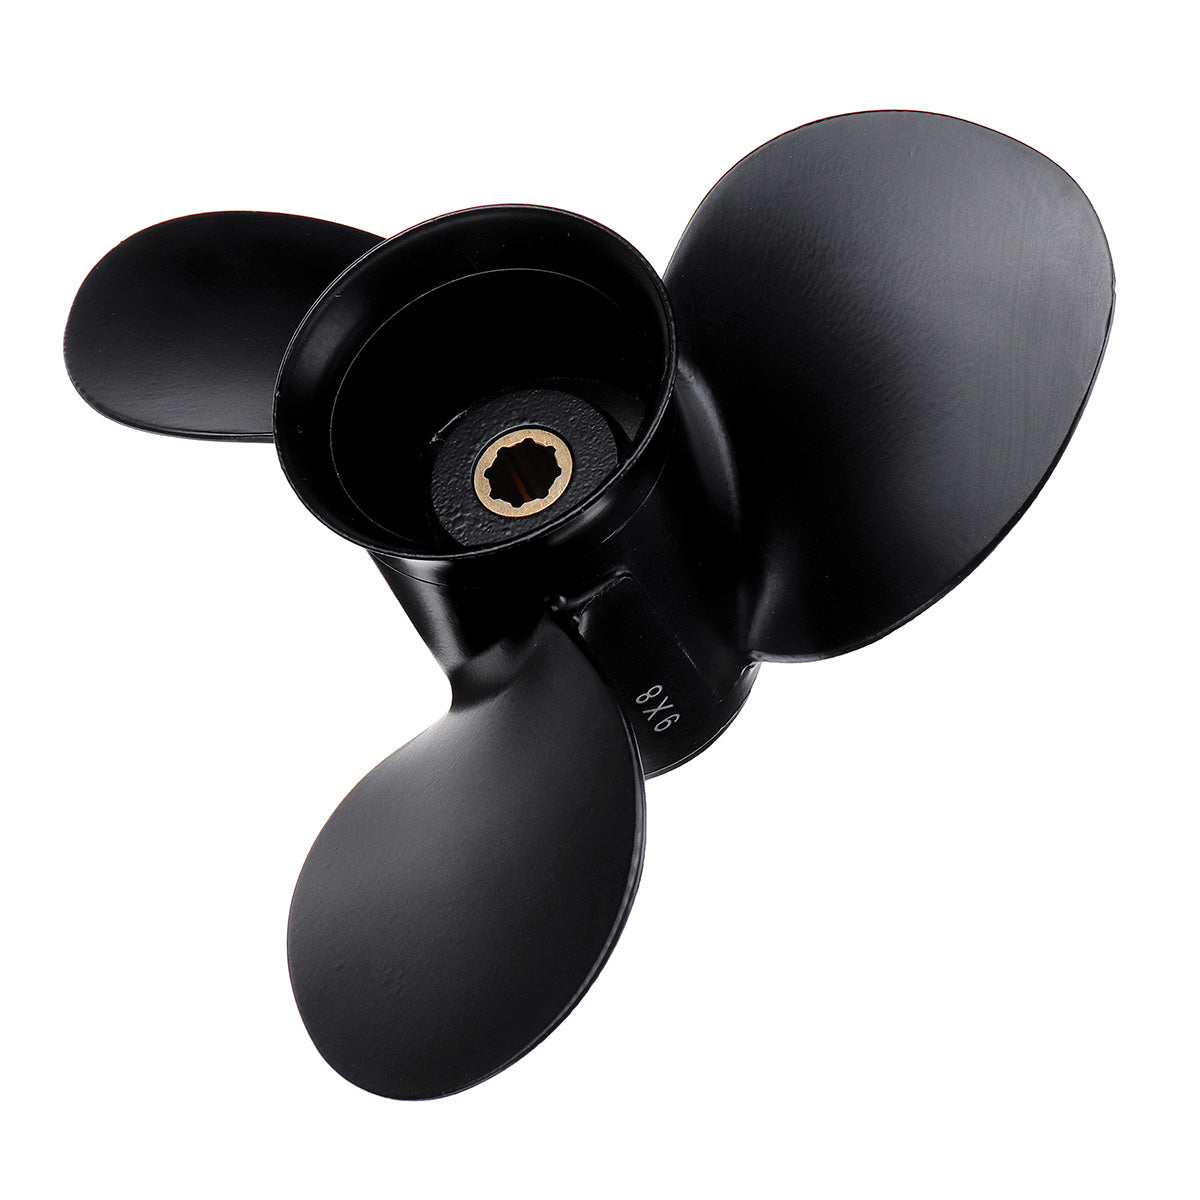 Black Aluminum Outboard Propeller For Mercury 6HP-15HP 48-828154A12